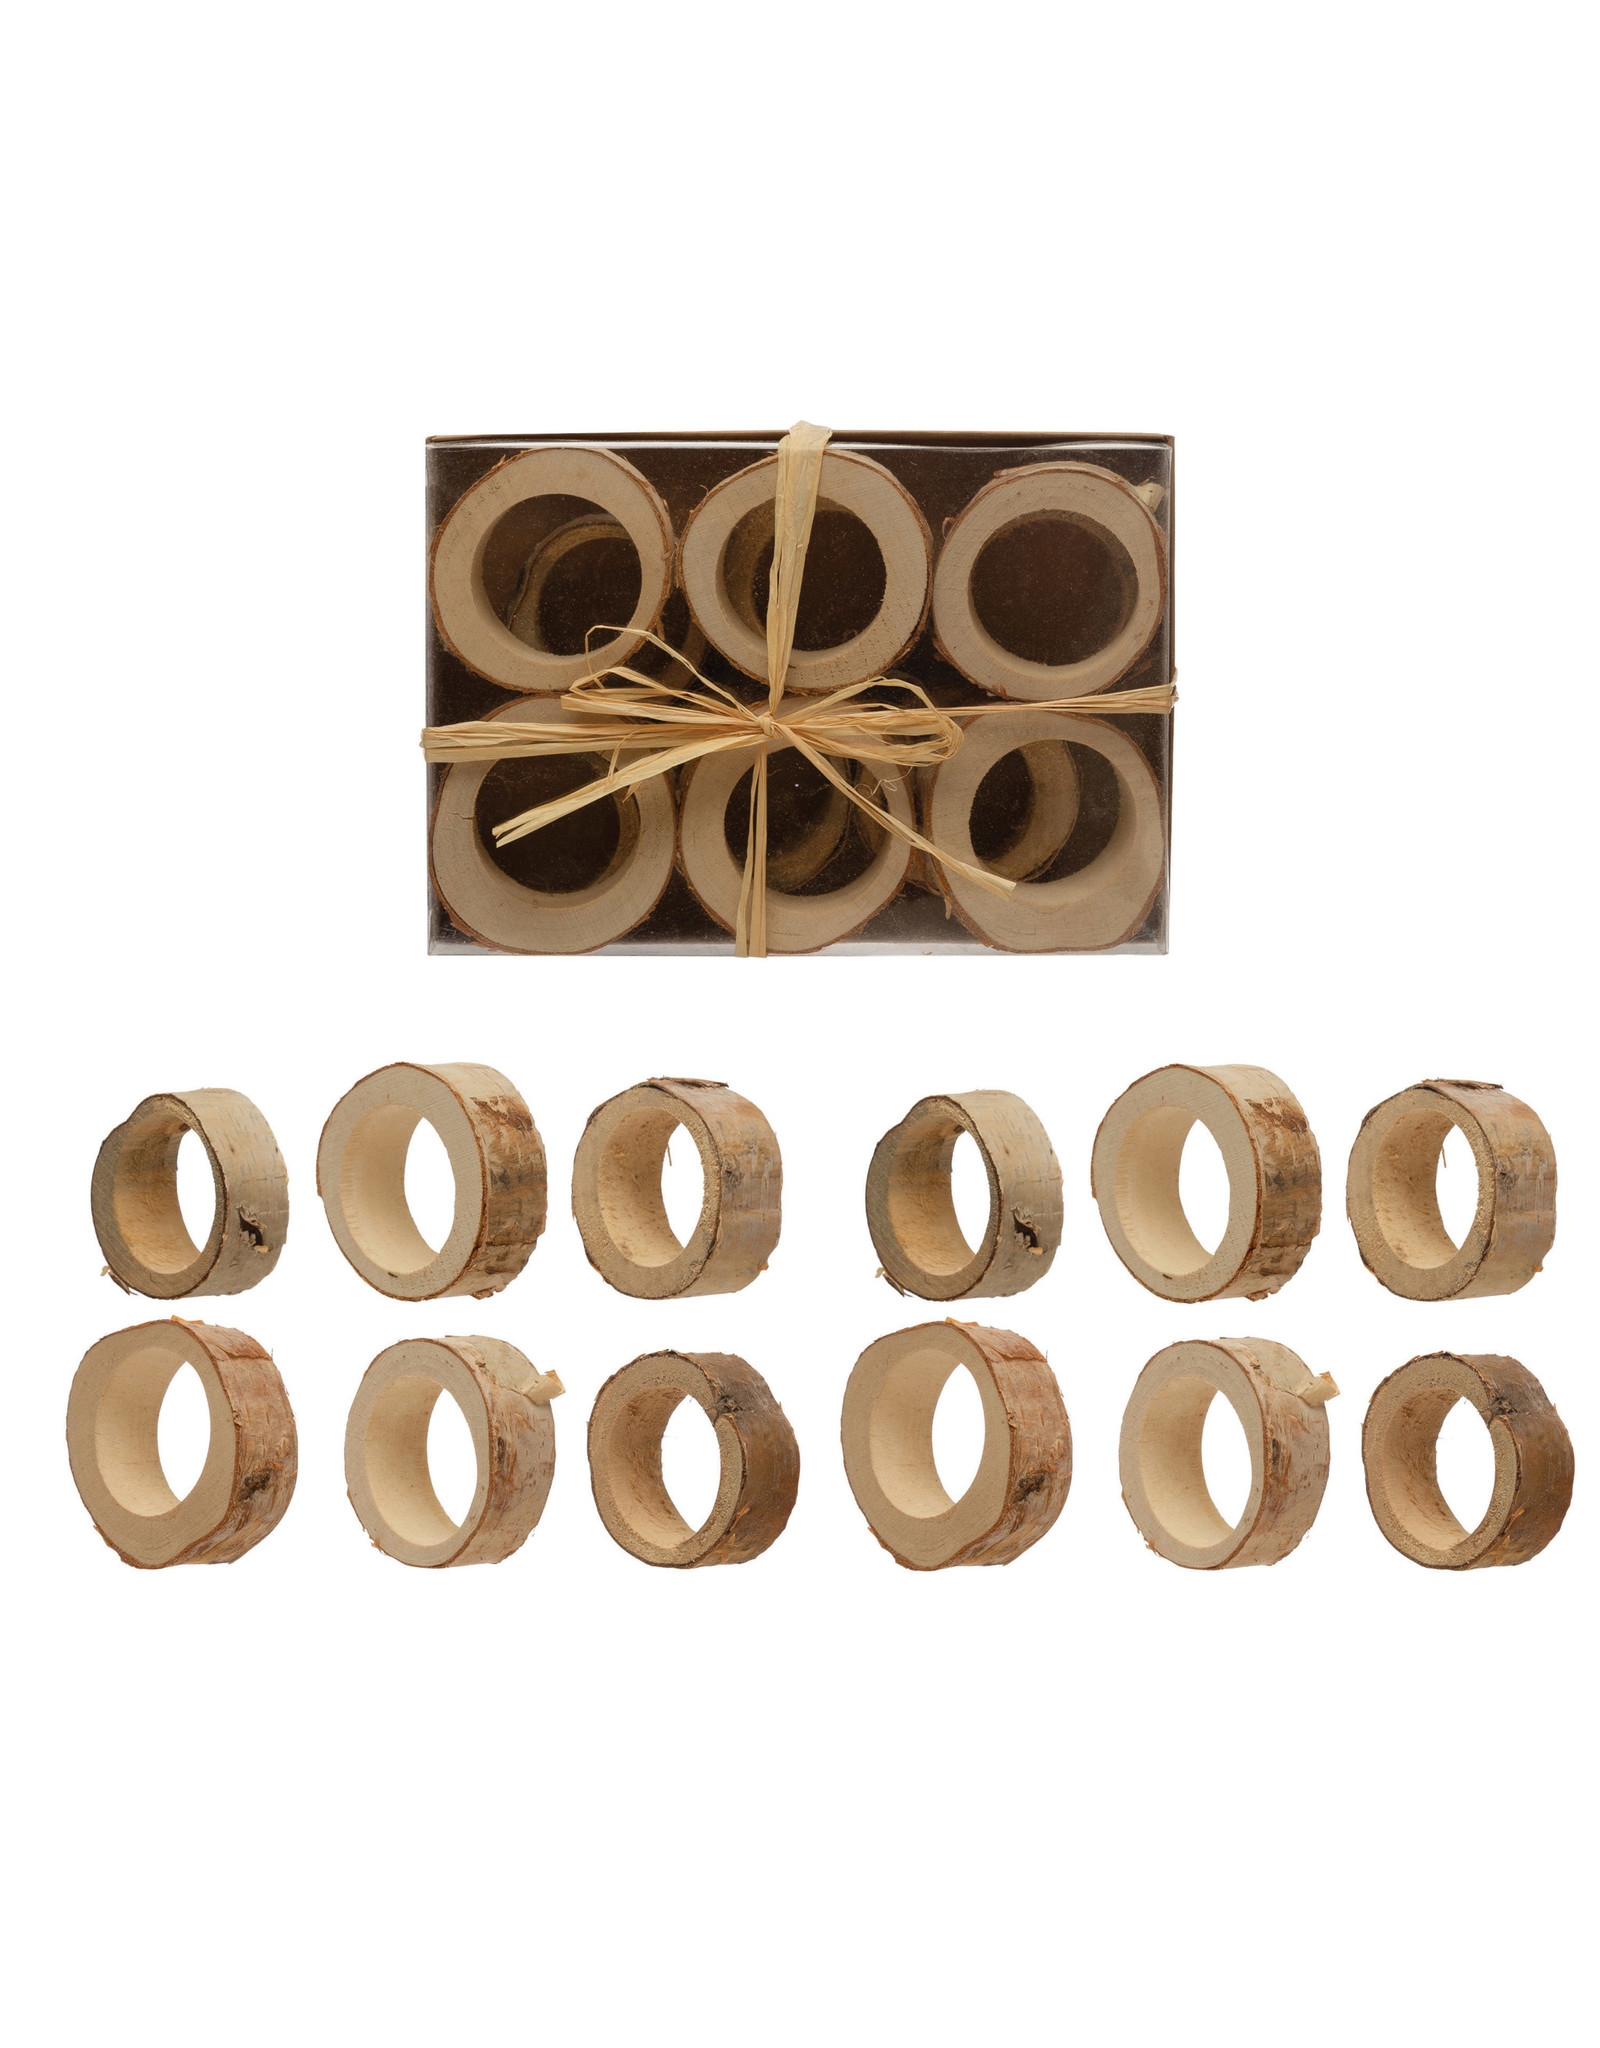 XS0960 Approximately 3" Round Birch Wood Napkin Rings, Boxed Set of 12